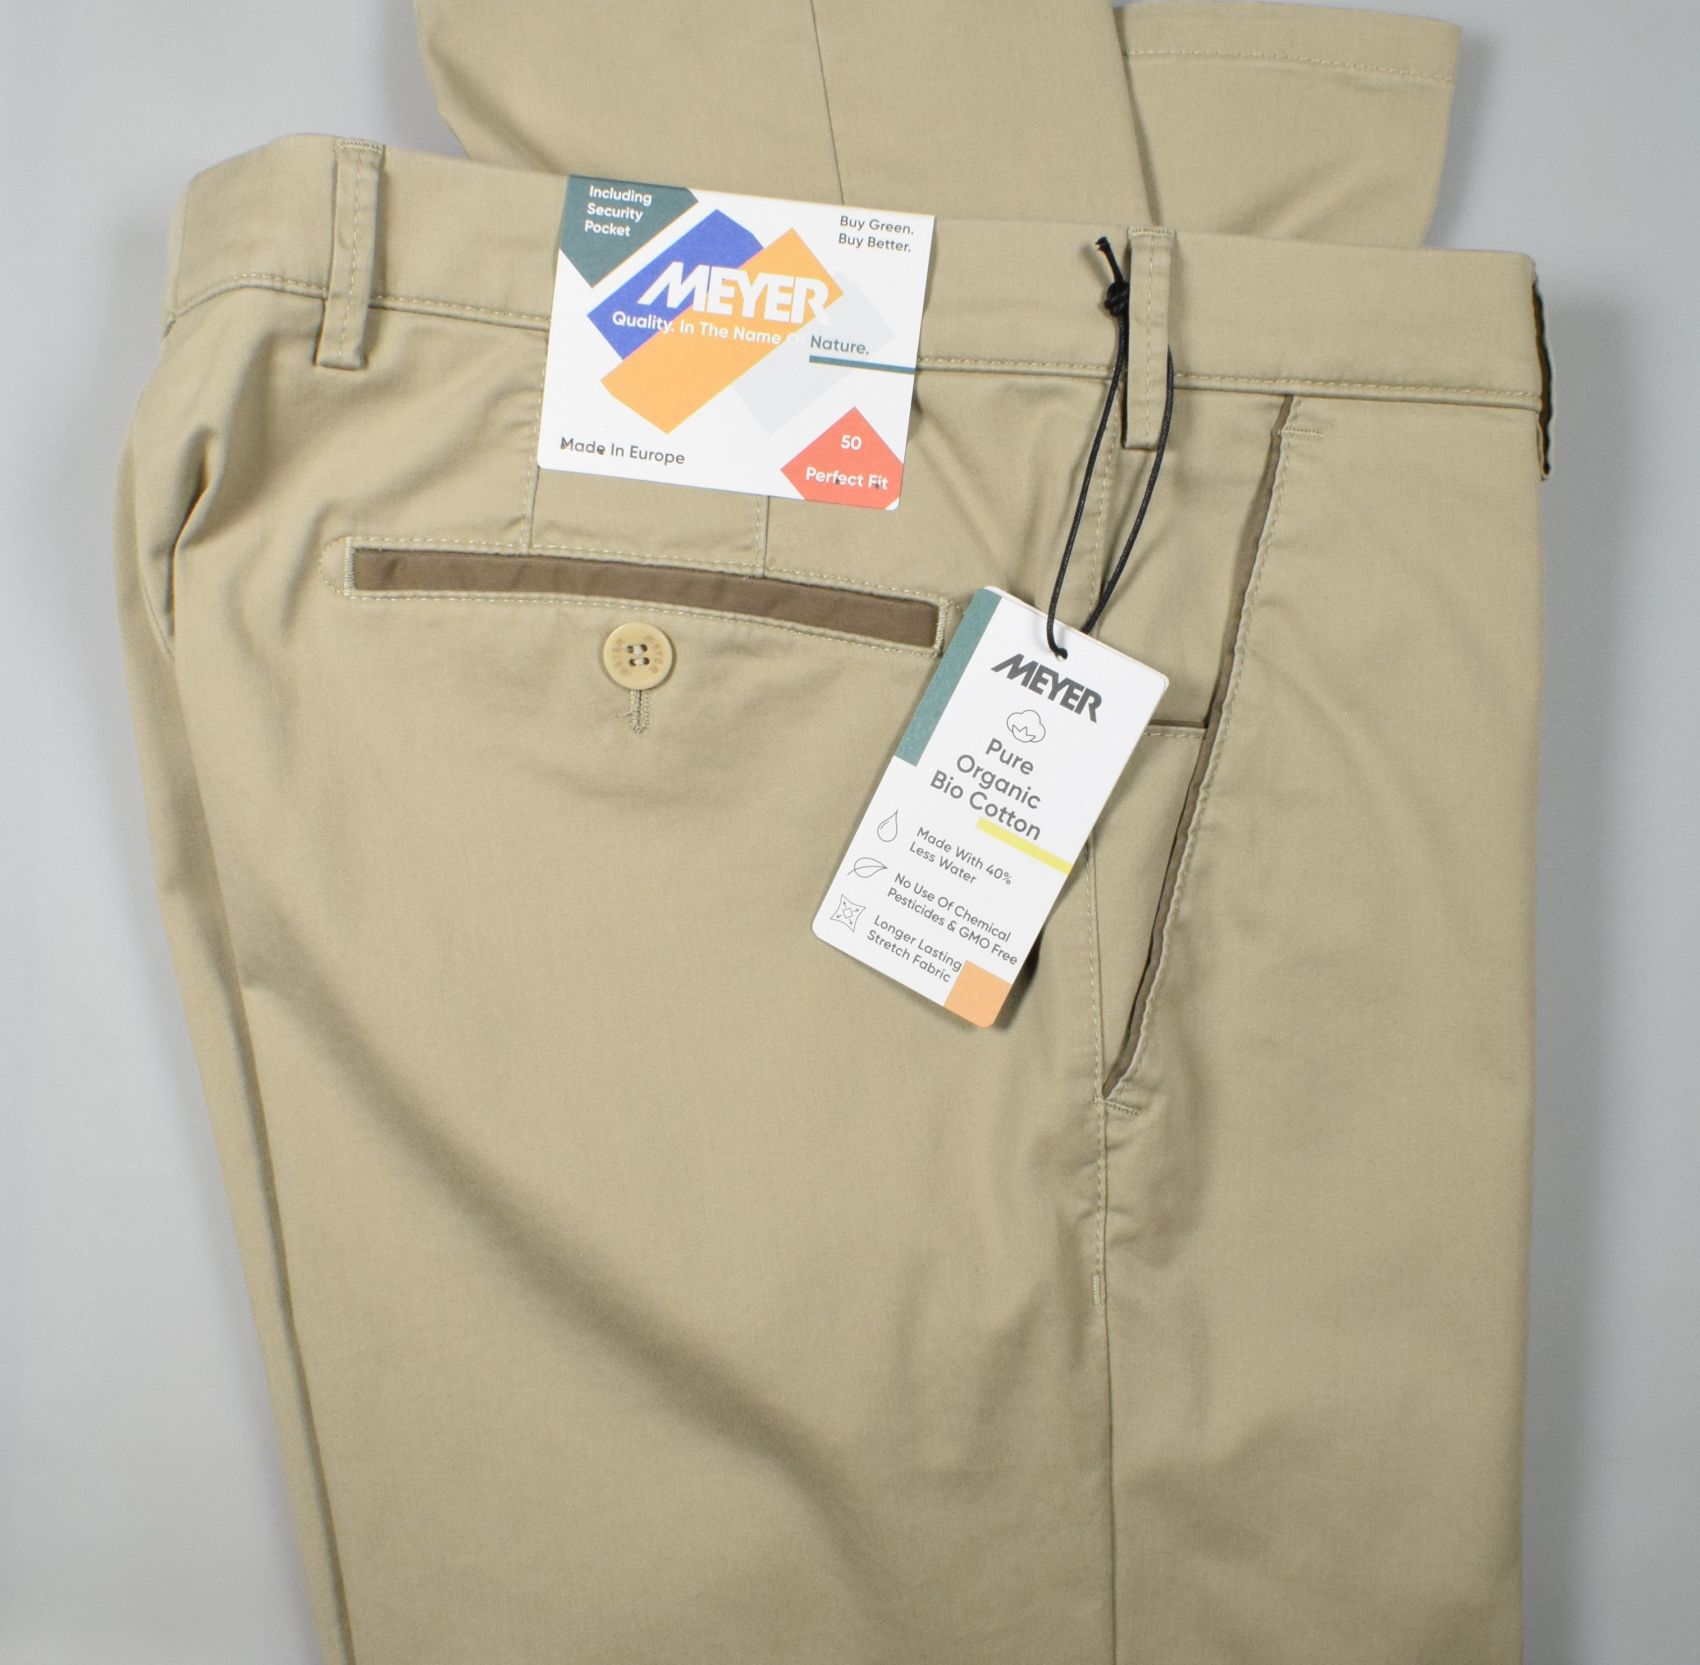 Buy highquality thermal trousers online  MEYERtrousers